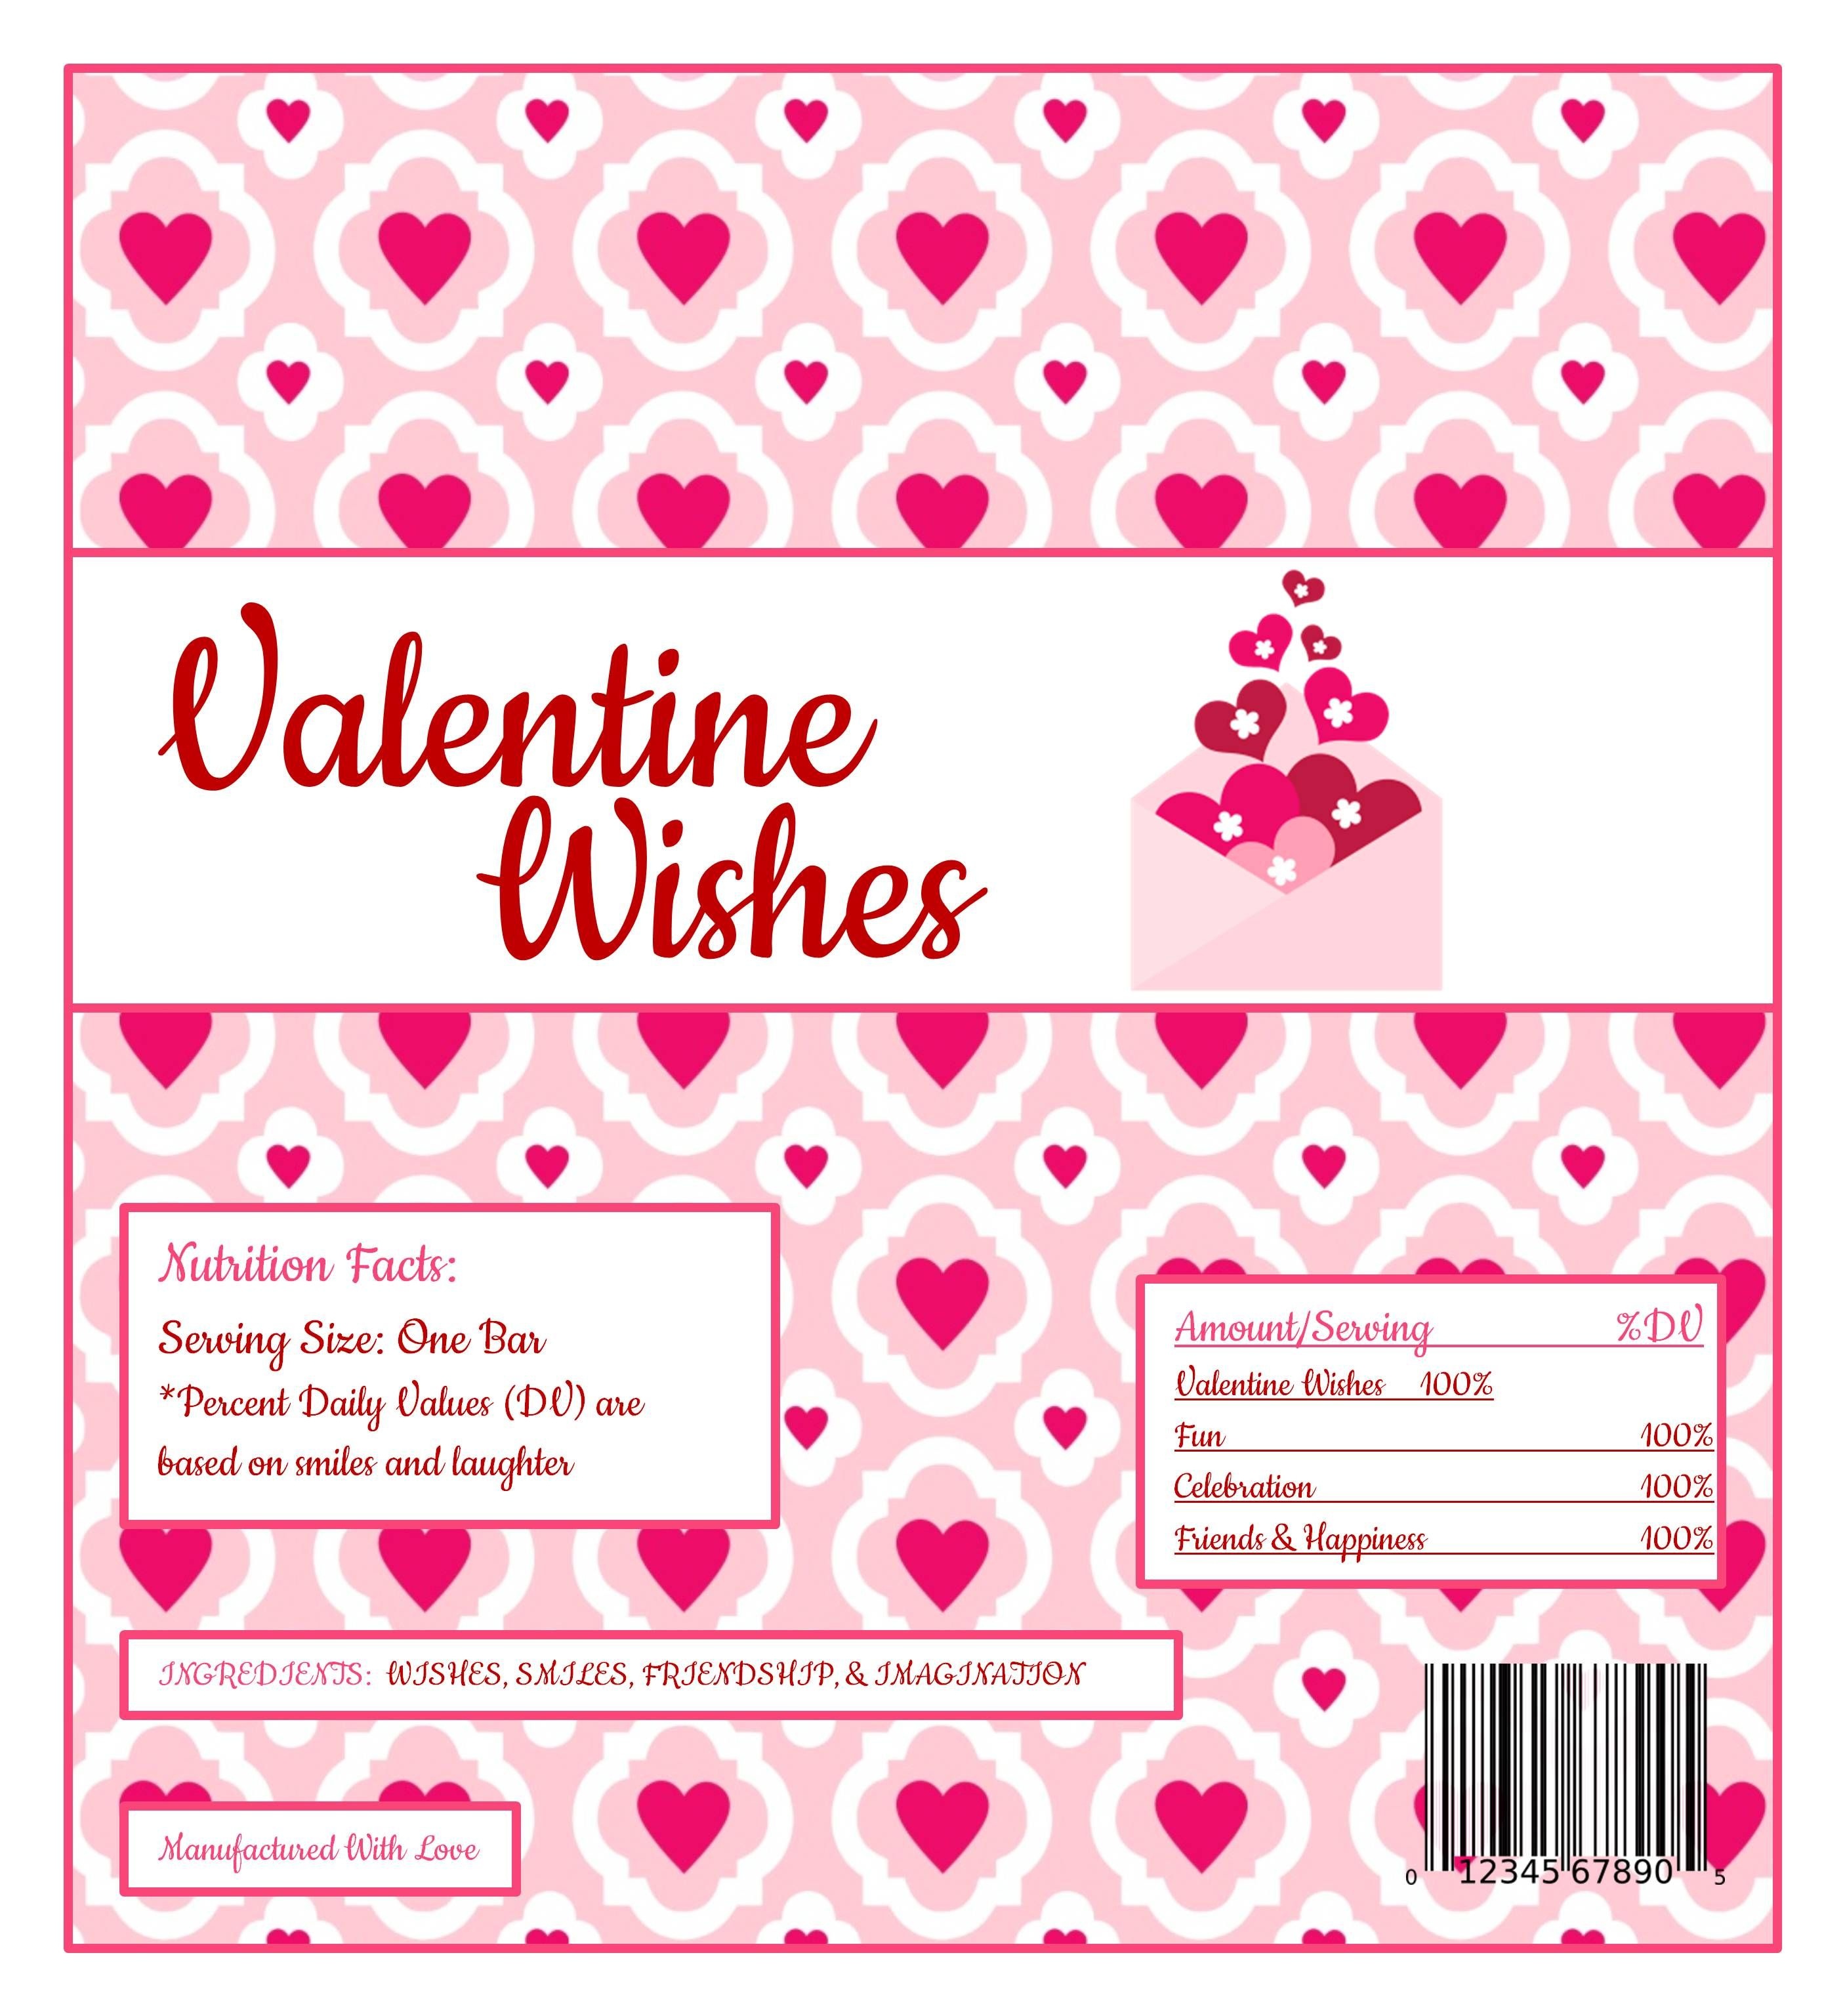 Printable Candy Bar Wrappers Free Template